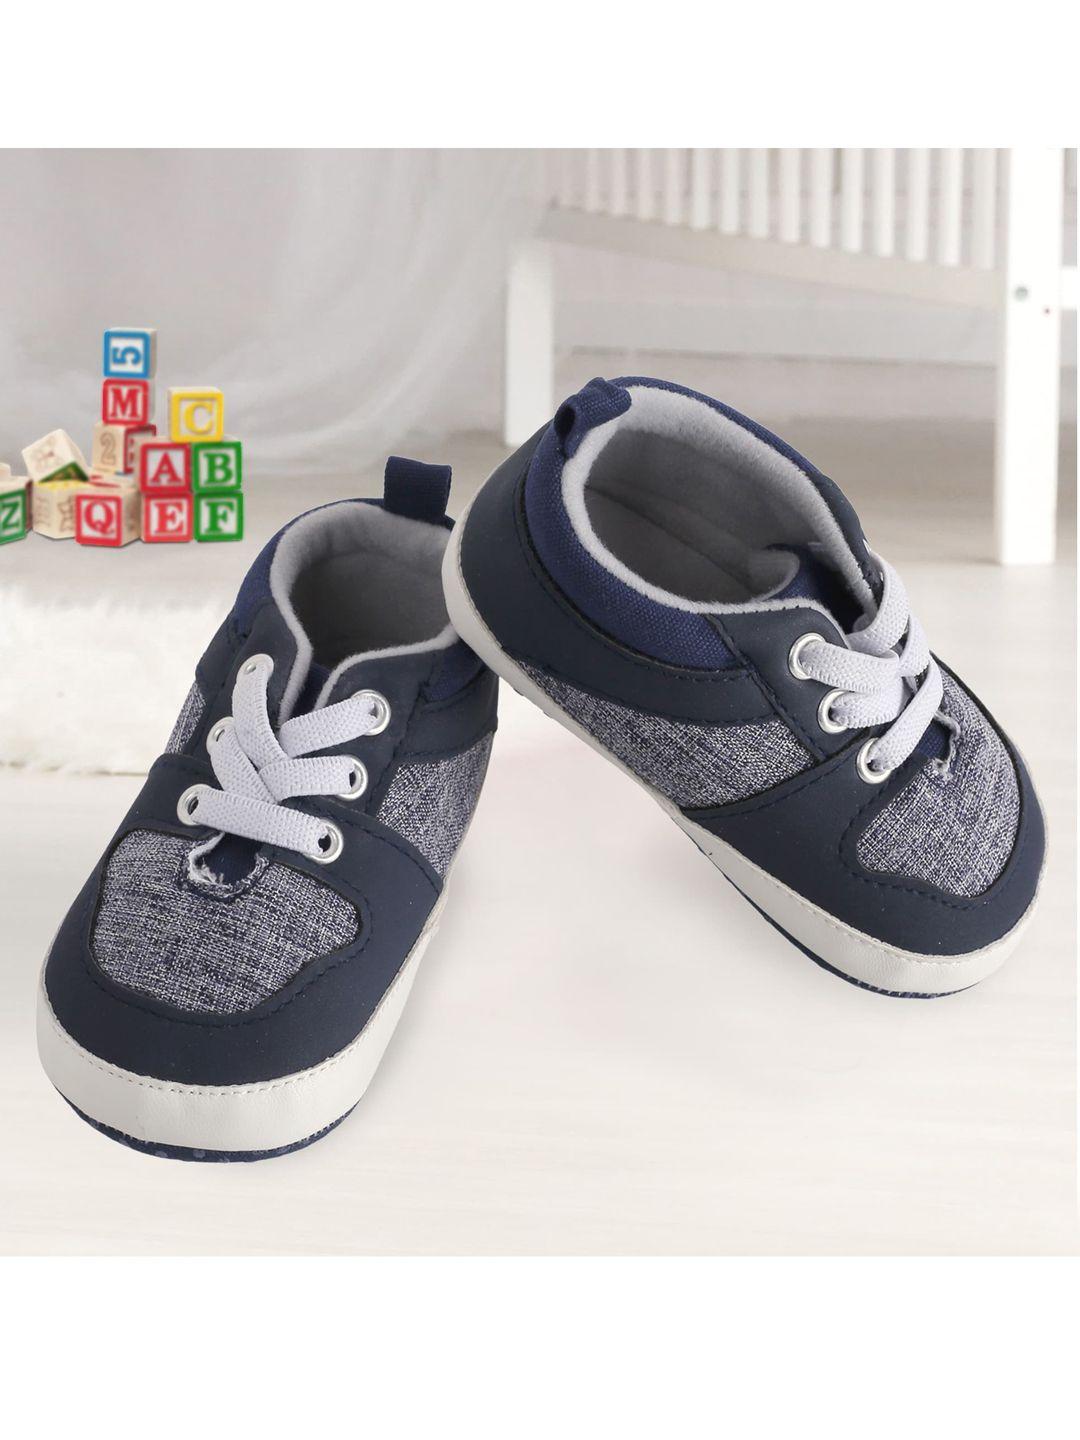 baby moo infant kids blue solid lace up booties